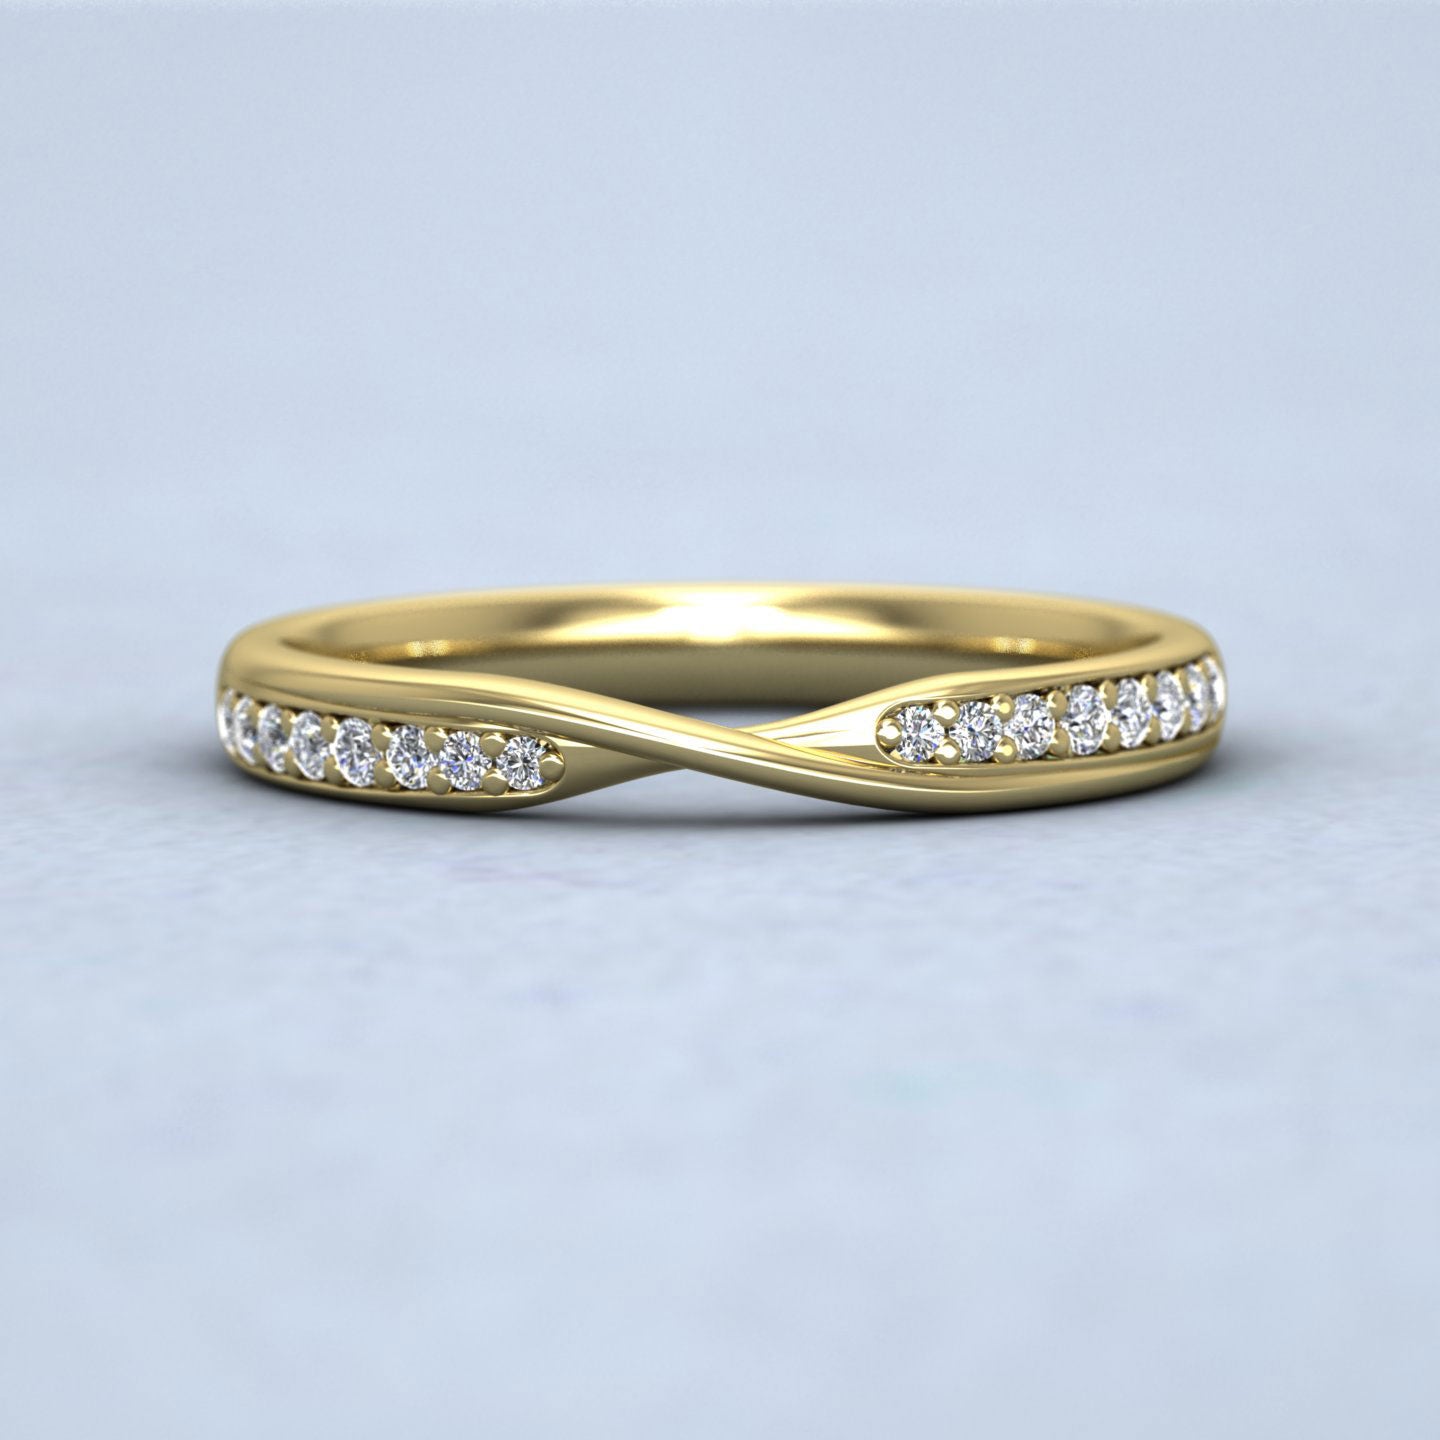 Crossover Pattern Wedding Ring In 18ct Yellow Gold 2.5mm Wide With Sixteen Diamonds